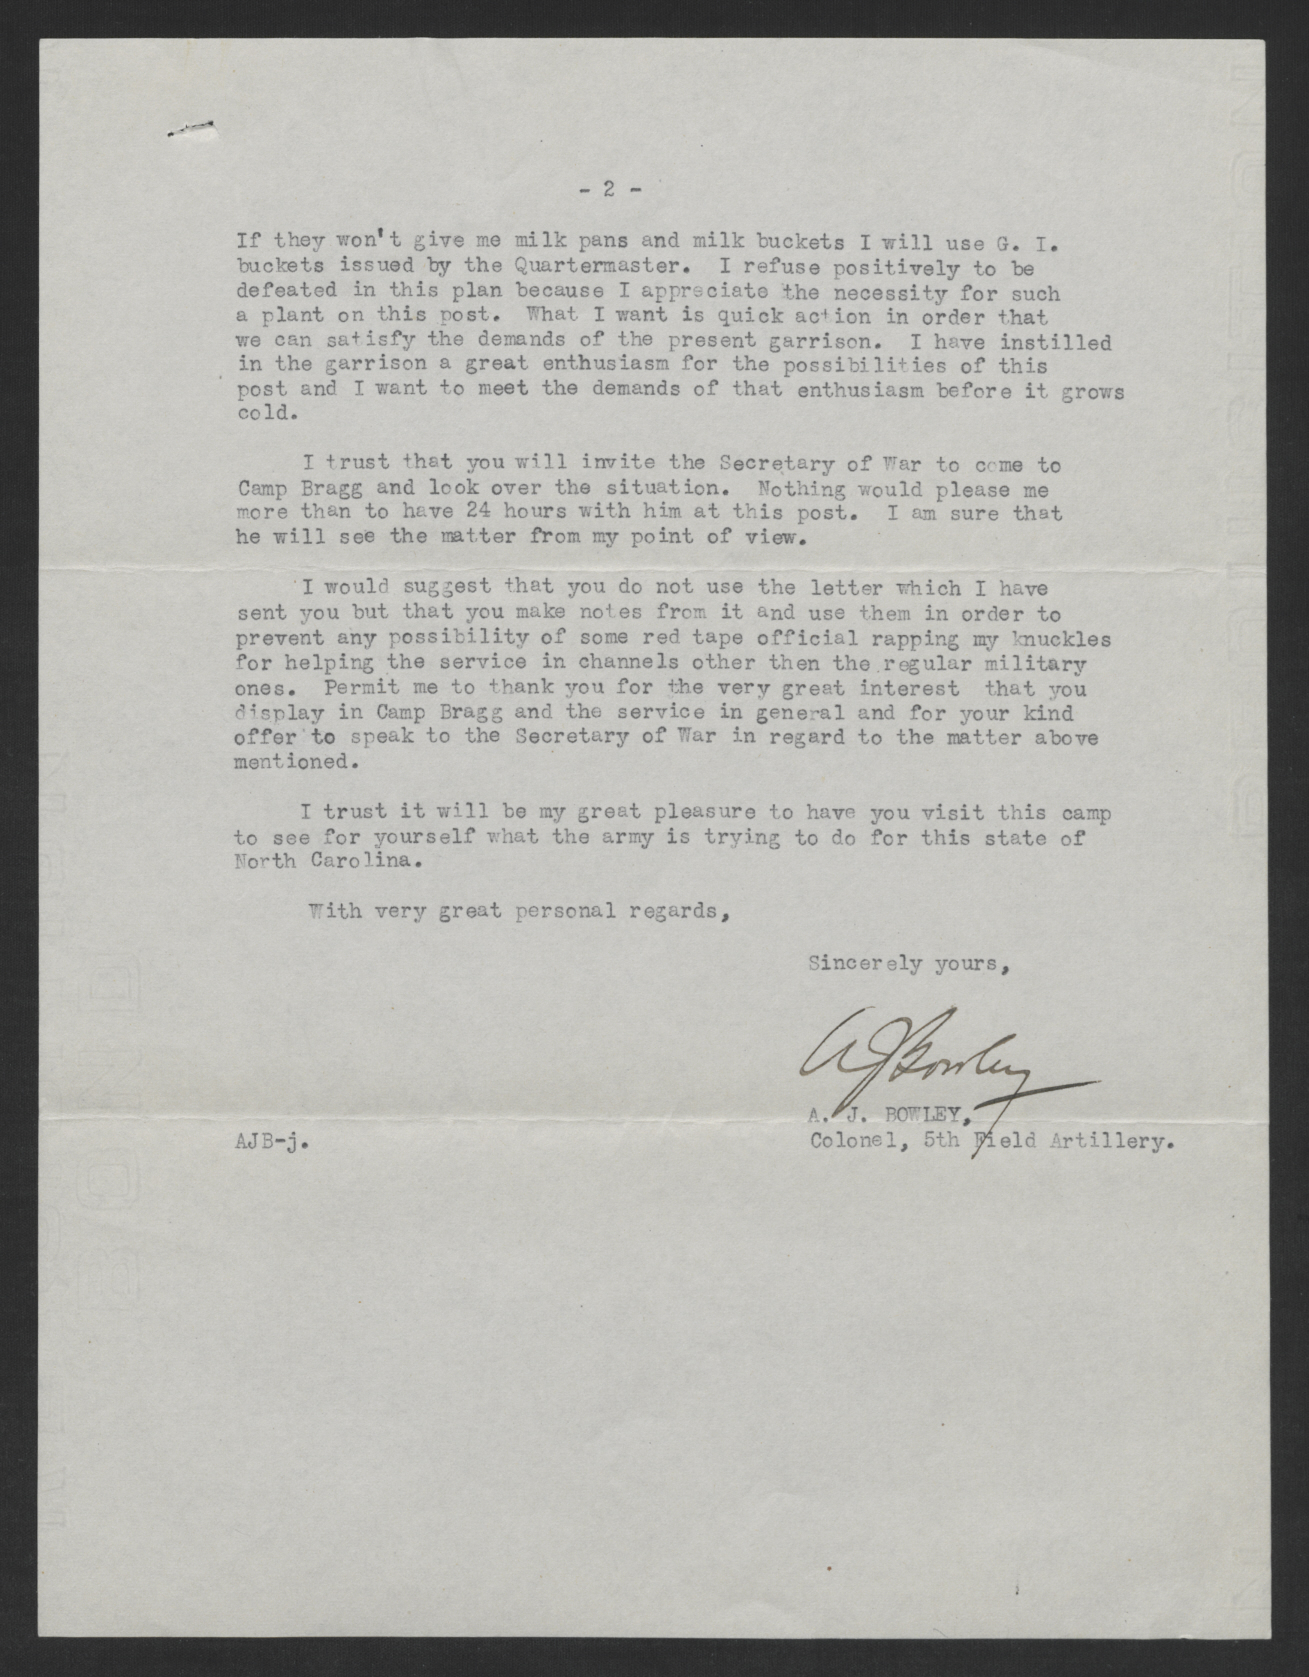 Letter from Albert J. Bowley to Thomas W. Bickett, November 27, 1920, page 2